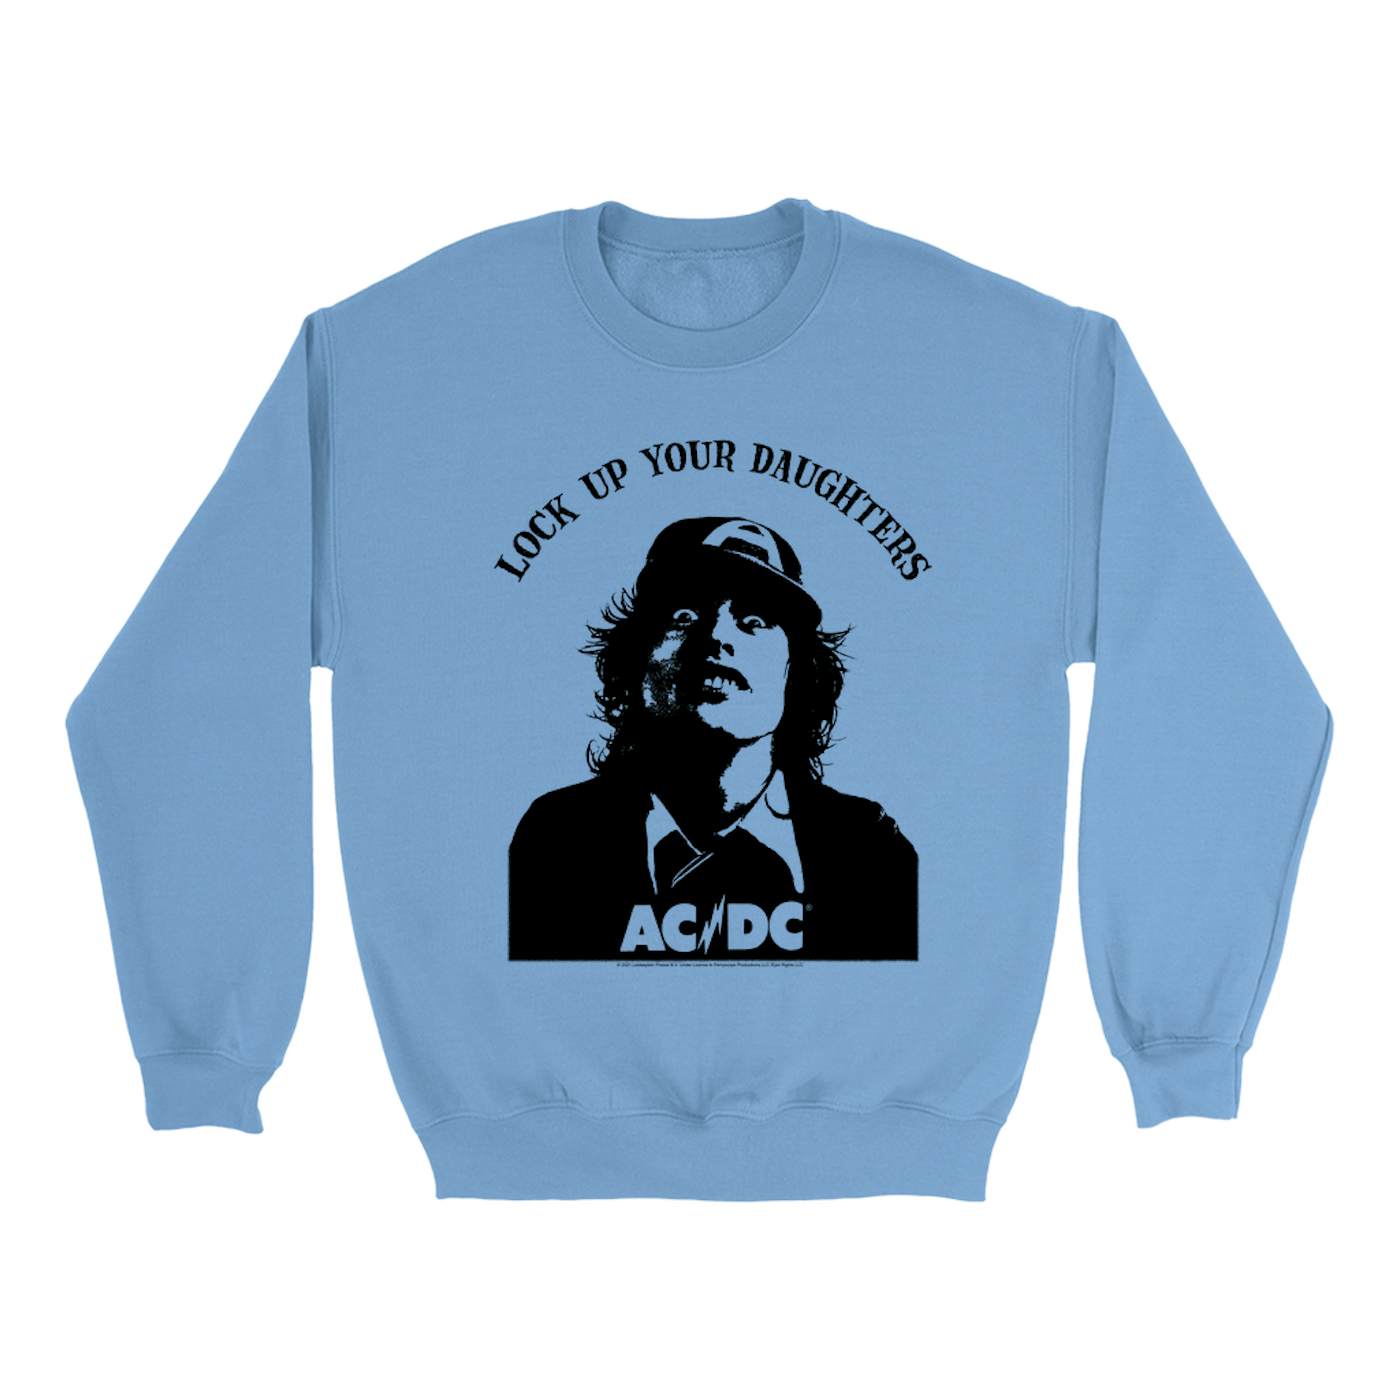 AC/DC Bright Colored Sweatshirt | Lock Up Your Daughters Featuring Angus Young Design ACDC Sweatshirt